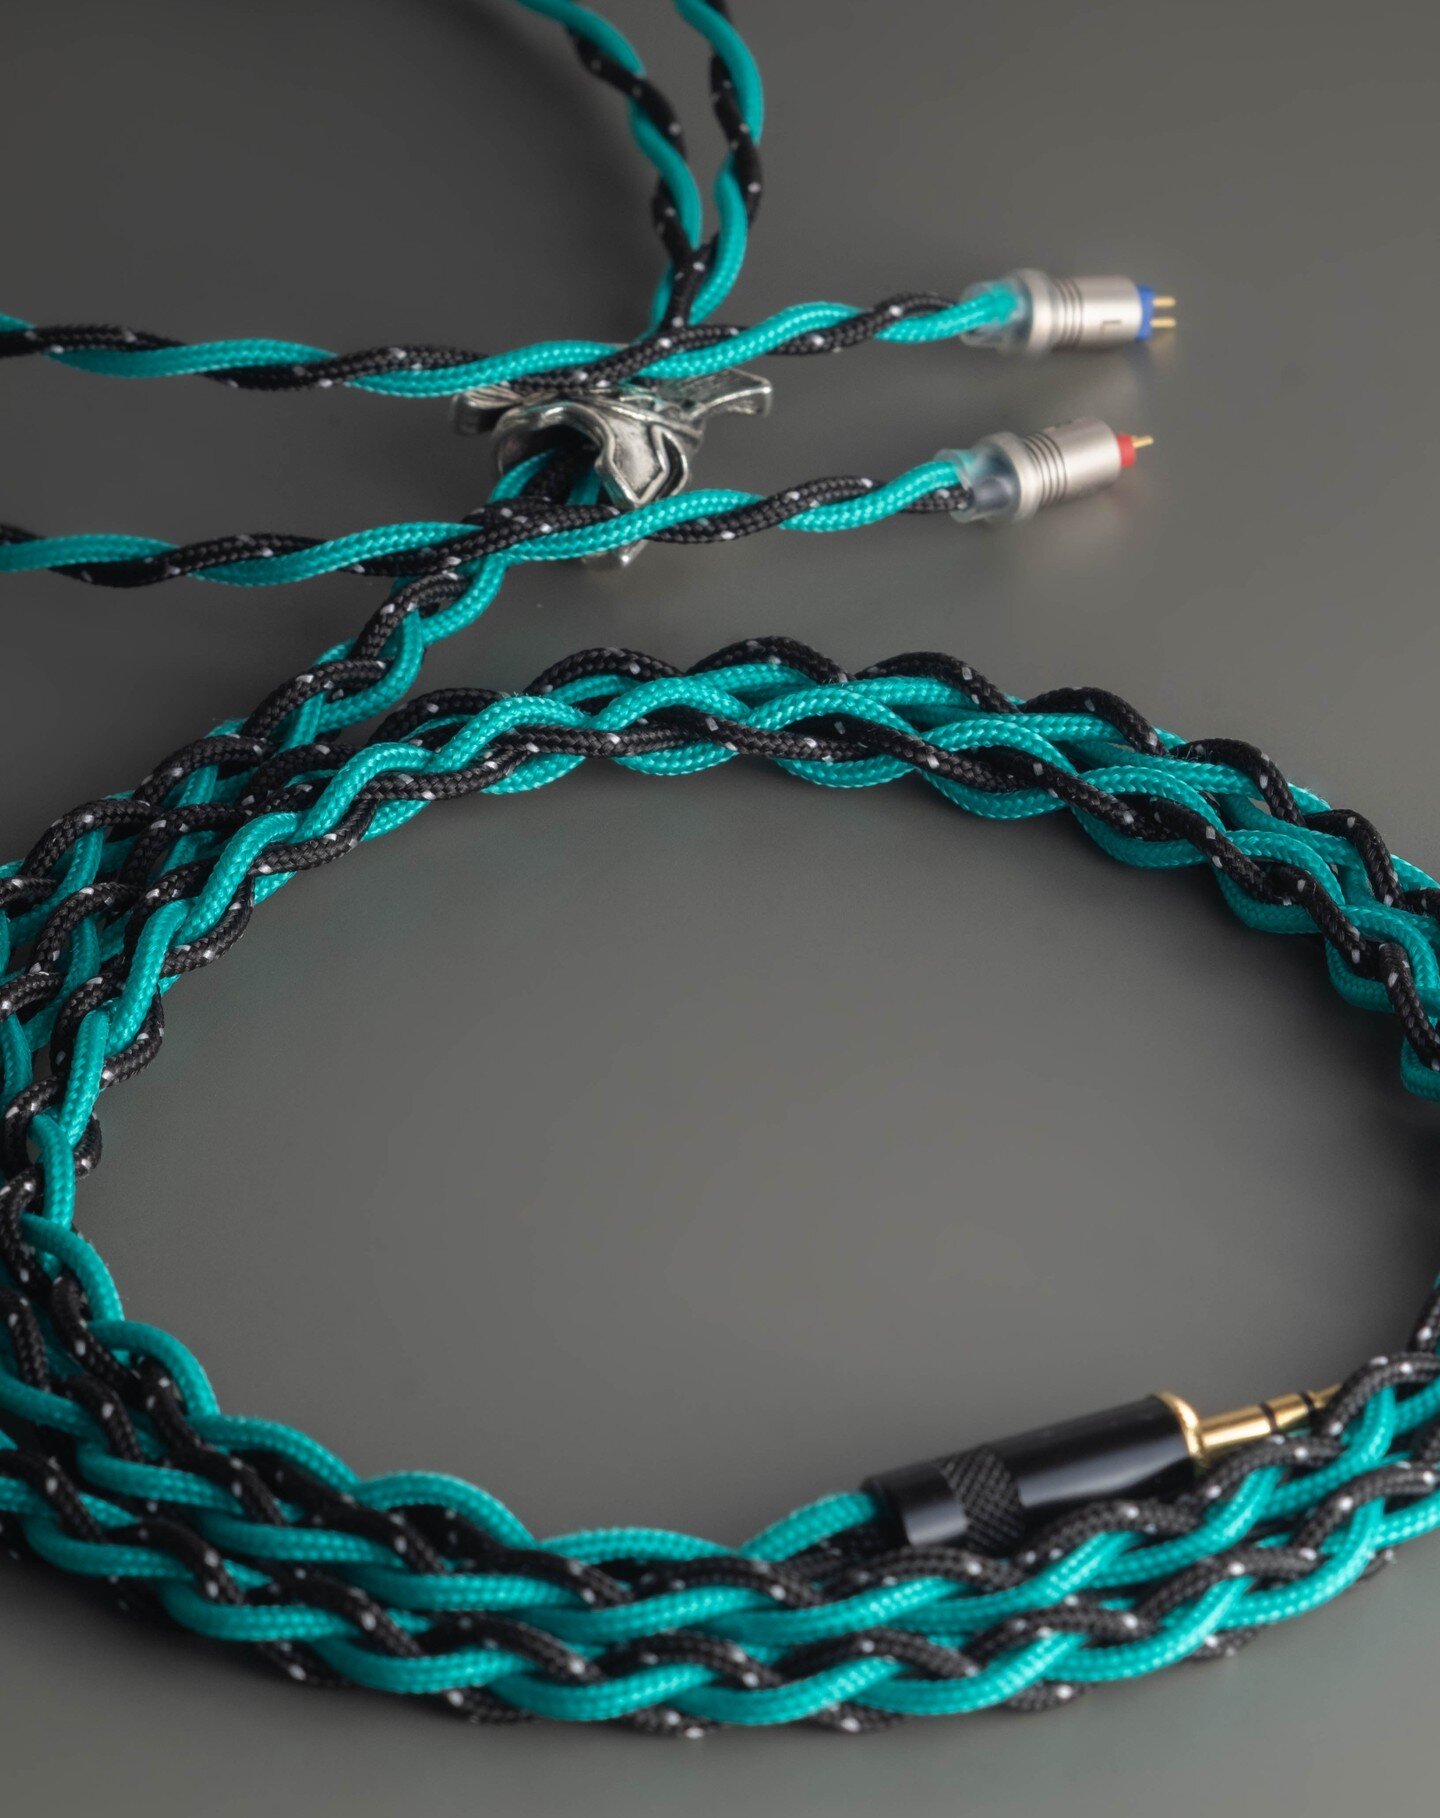 Gladiator Line - Sonum 3 iem cable with a @neutrik.de rean 3.5mm and our copper alloy 2pins with our beautiful gladiator helmet in silver and a cyan + black with white dots custom made for a customer